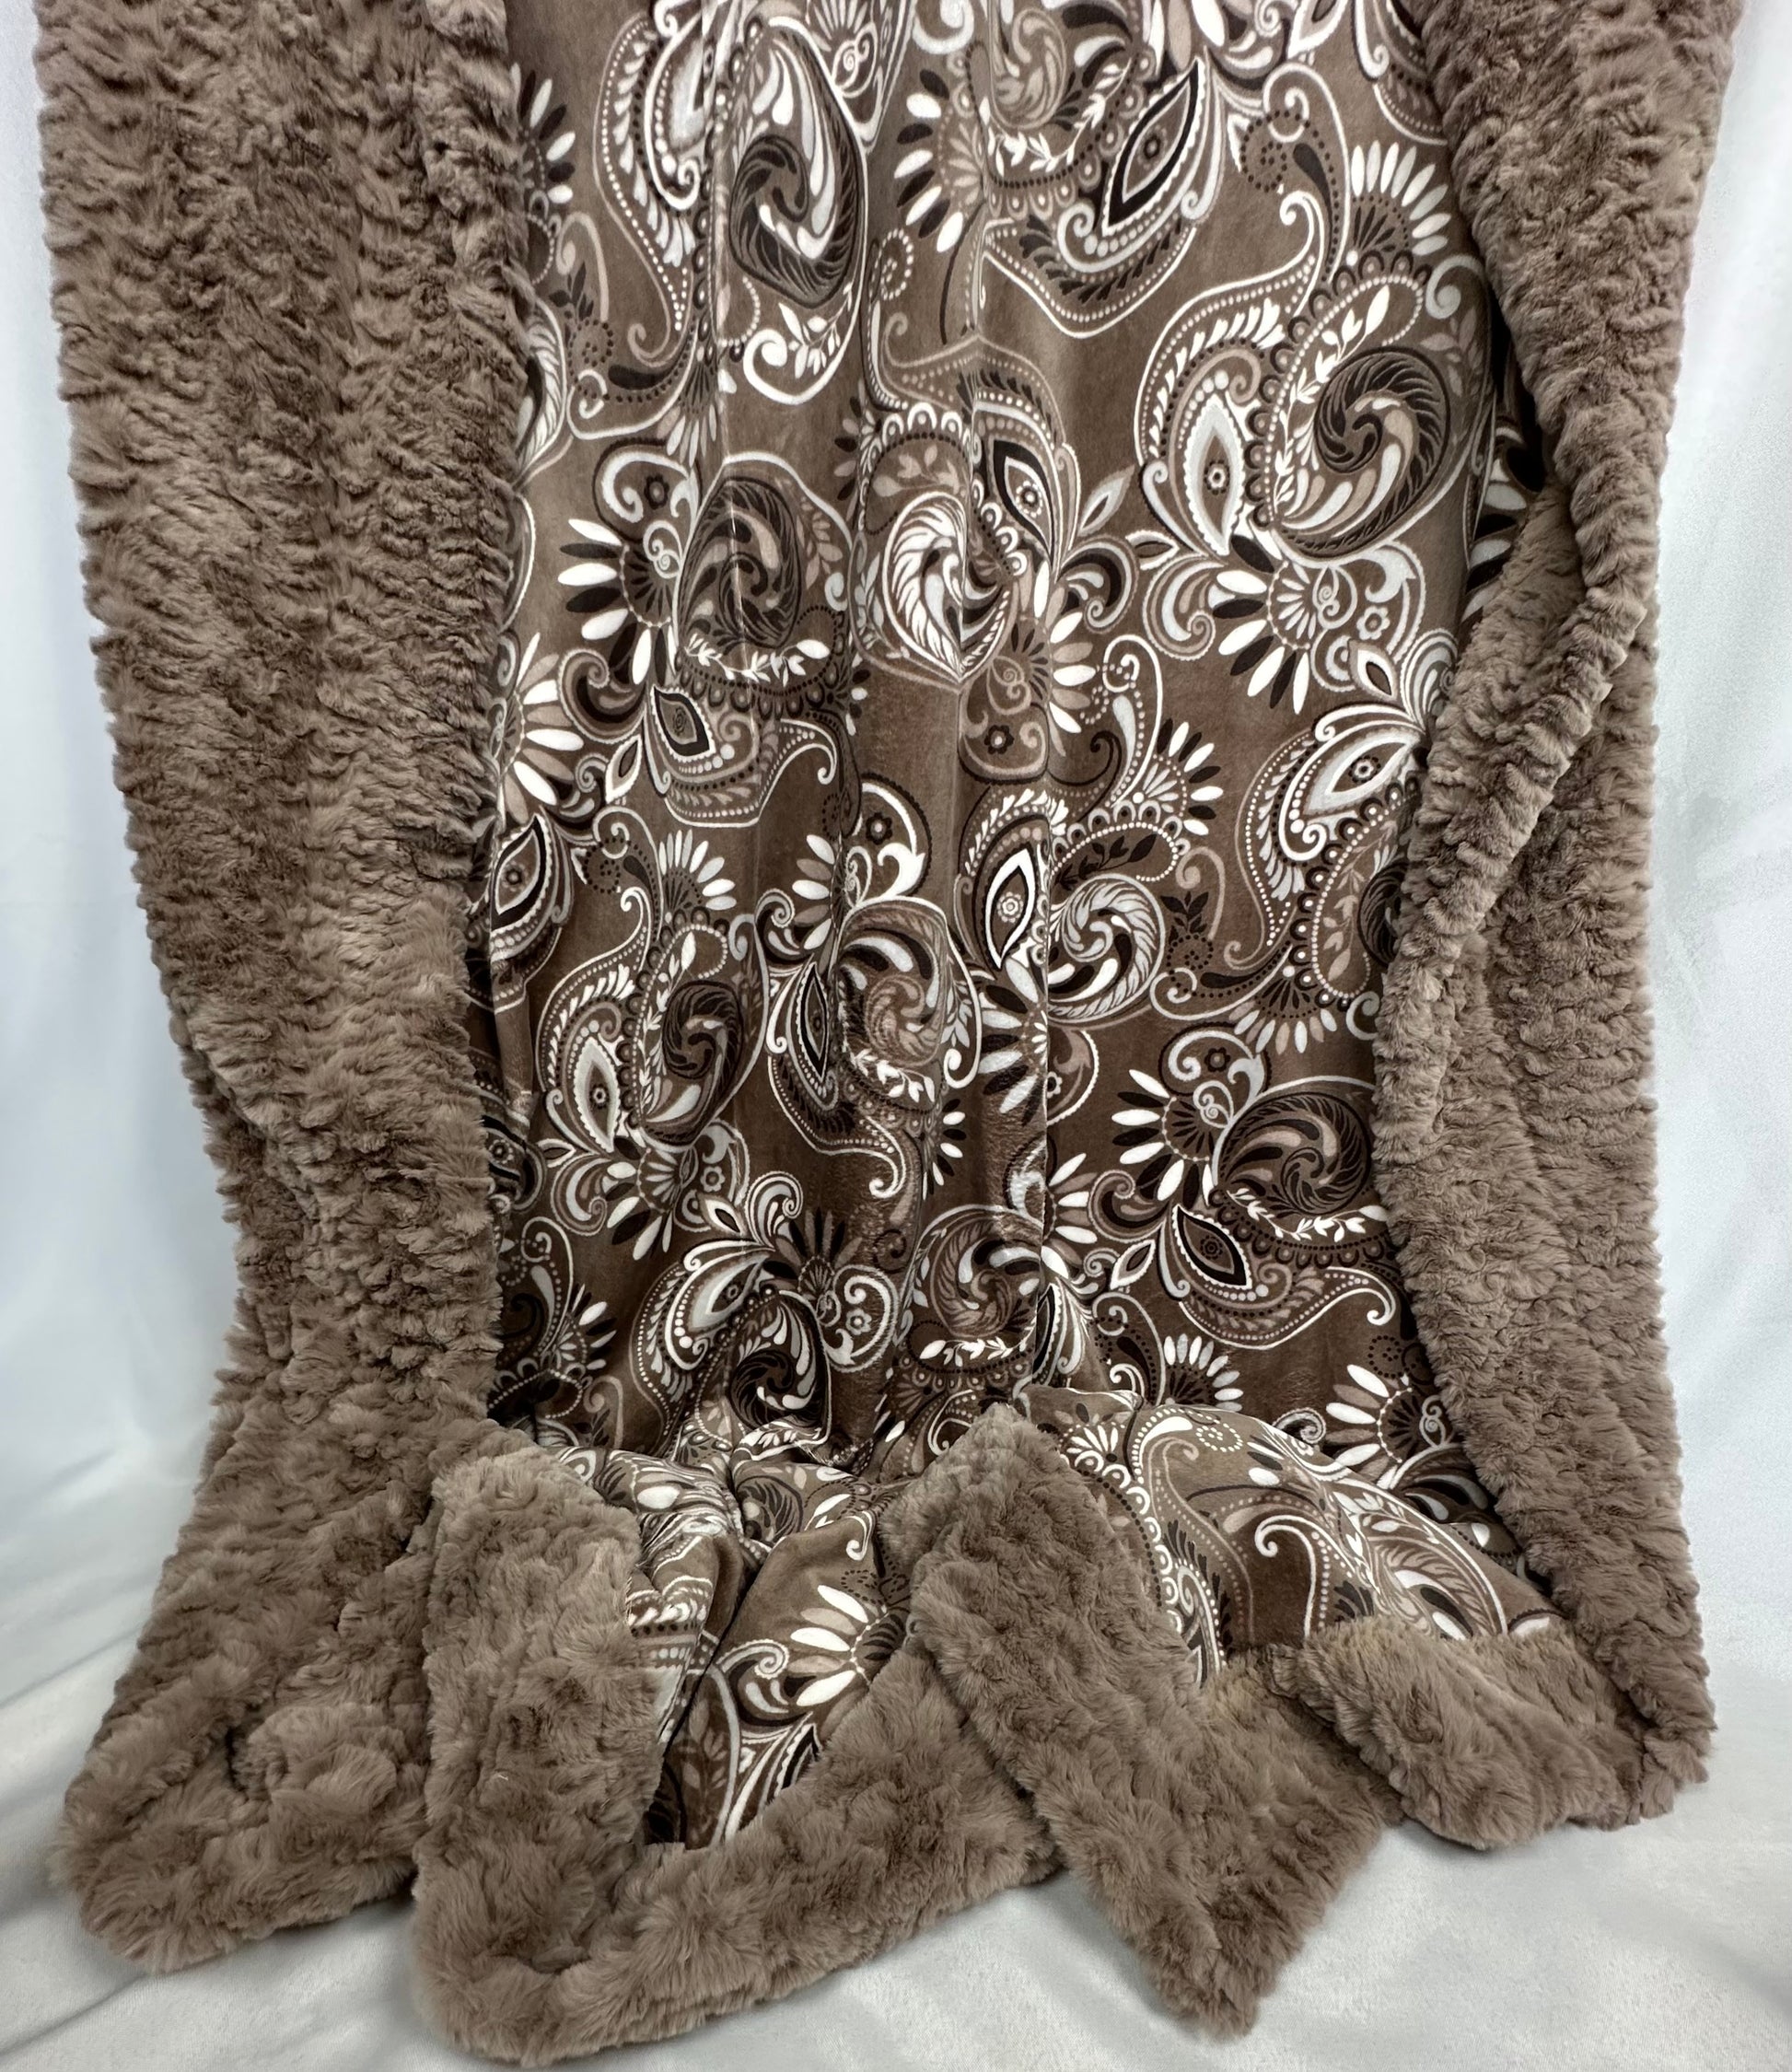 Paisley Taupe on Light Taupe Florence Adult Blanket - High-Quality Craftsmanship - 53x75